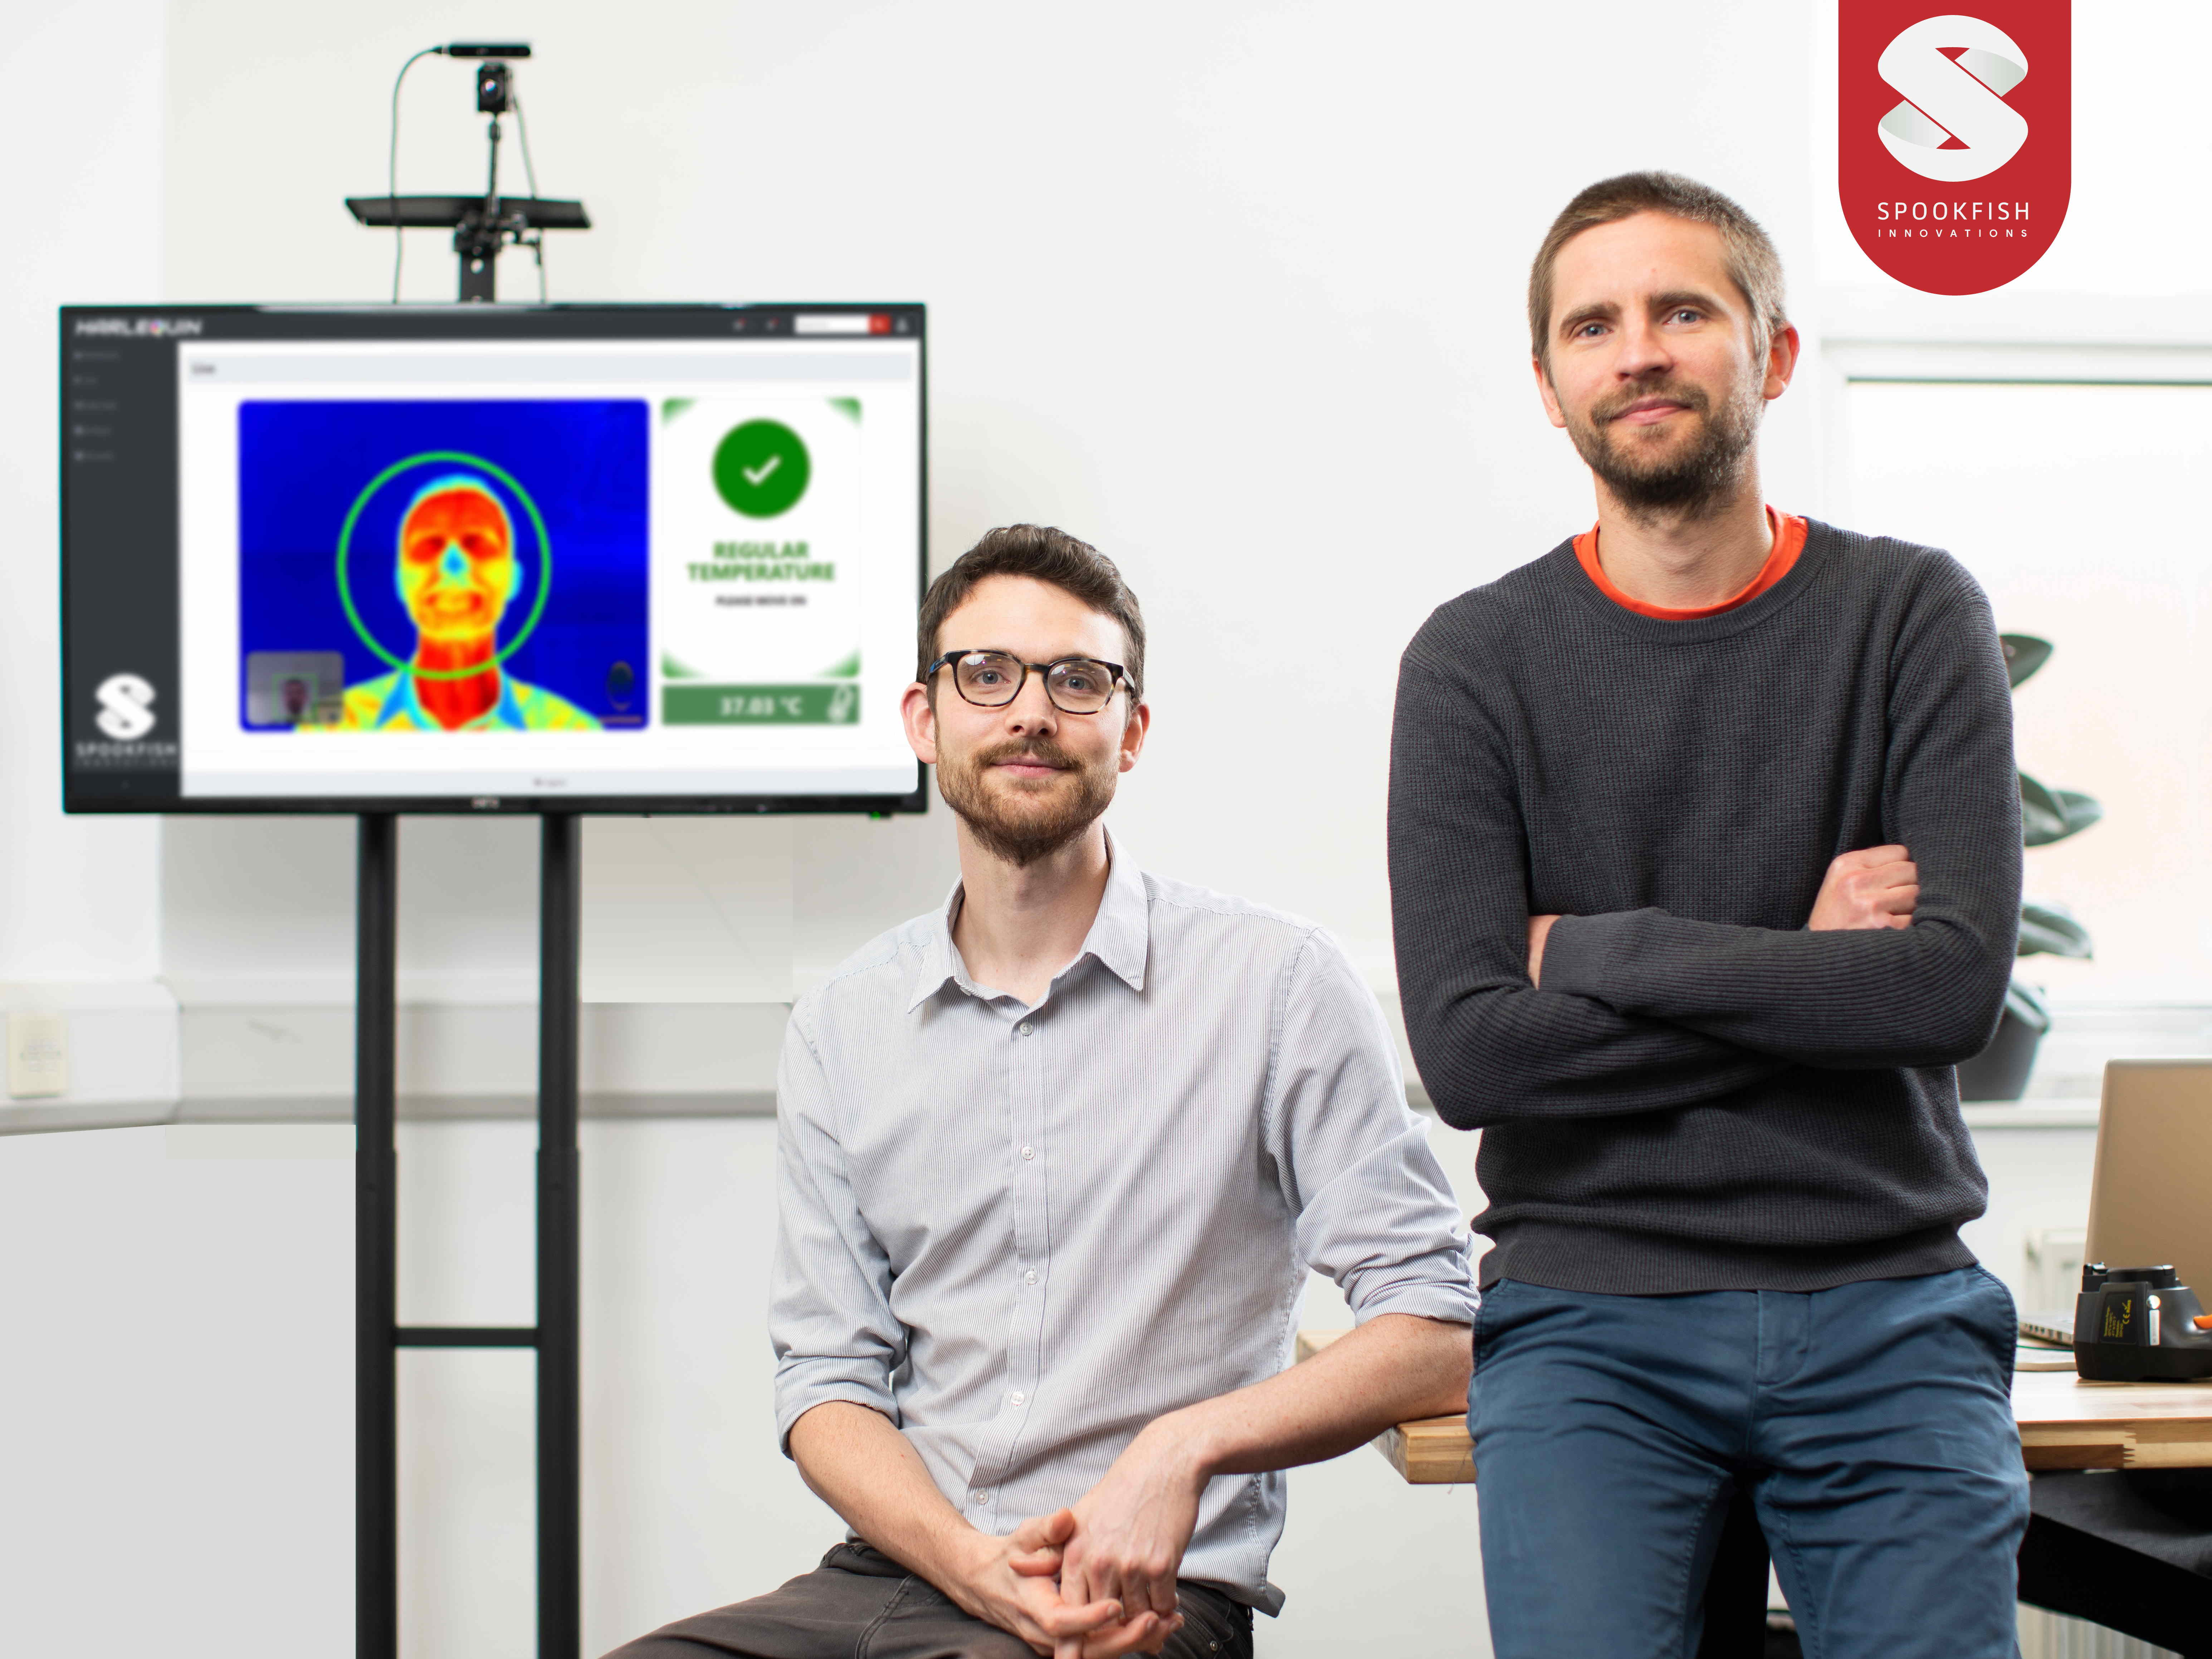 Spookfish directors John Robinson and Jouni Ronkainen pictured in front of a screen displaying their fever detection technology